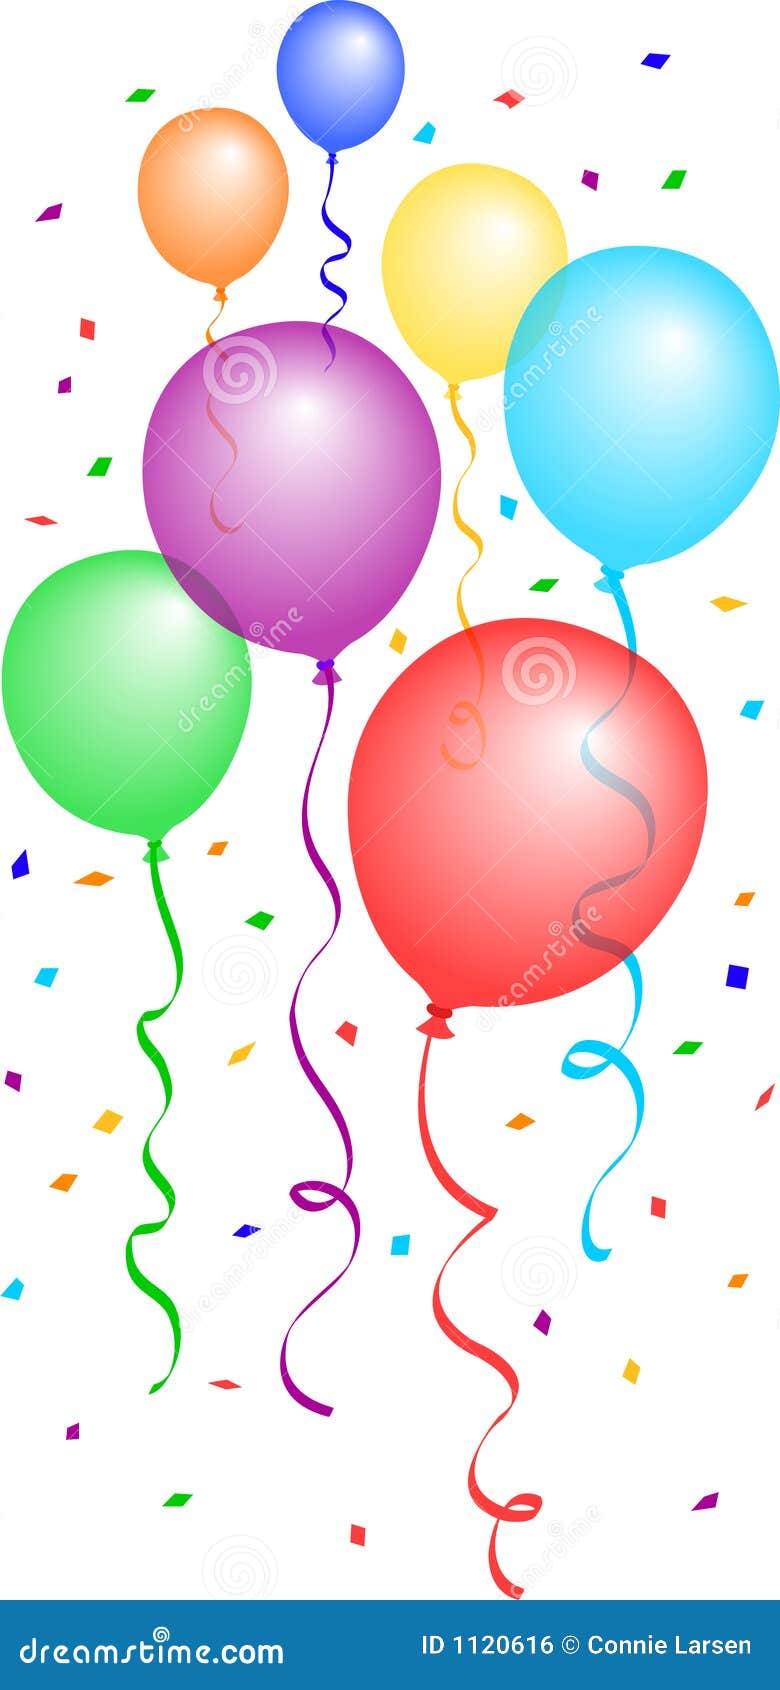 balloons and confetti clipart - photo #17